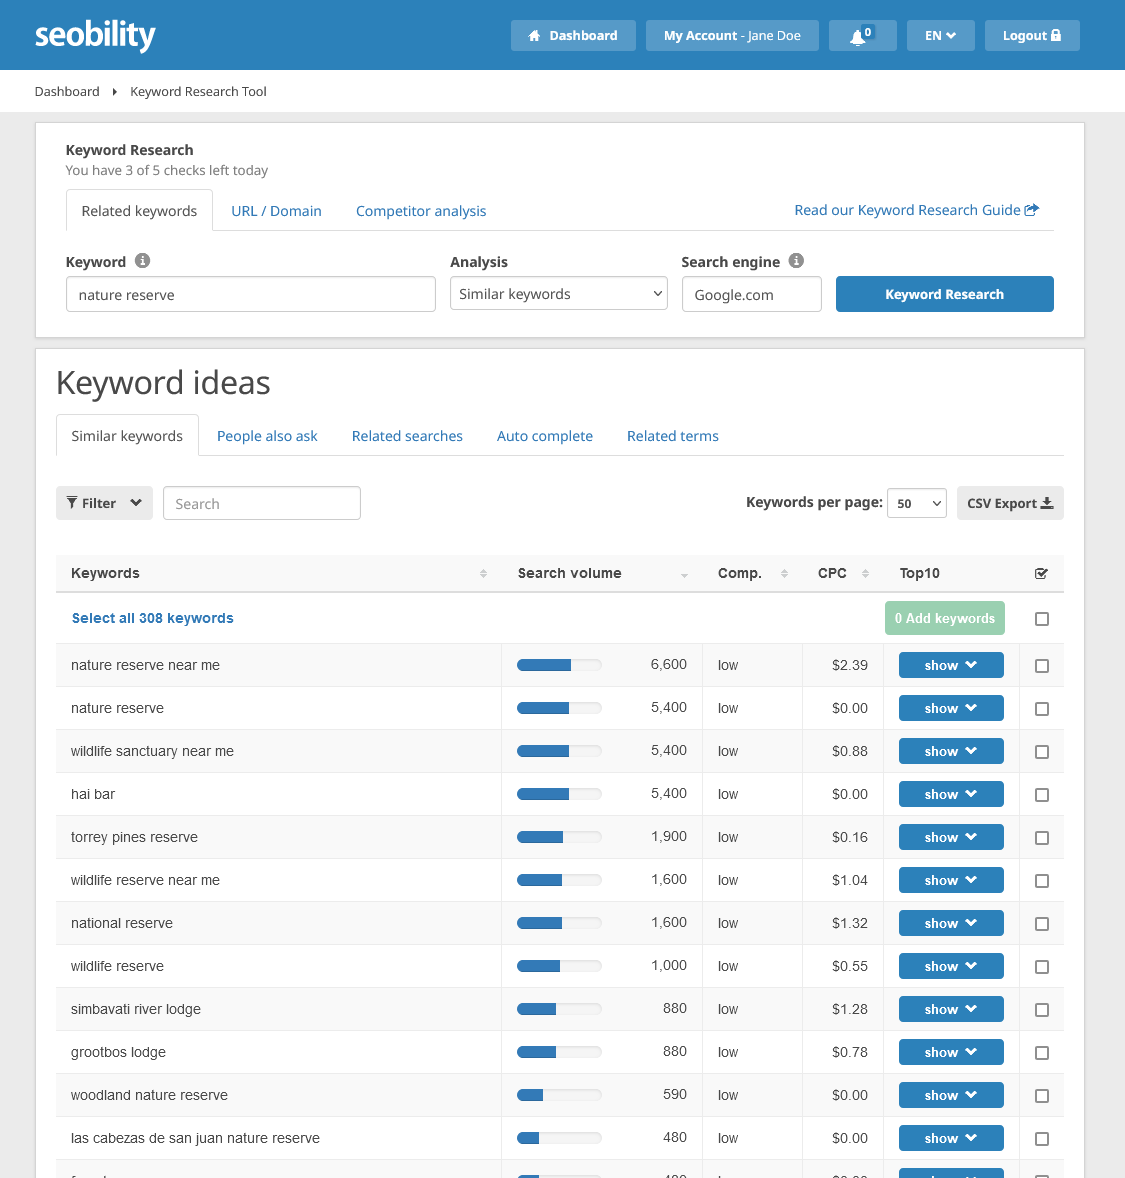 Keyword Research Tool from Seobility